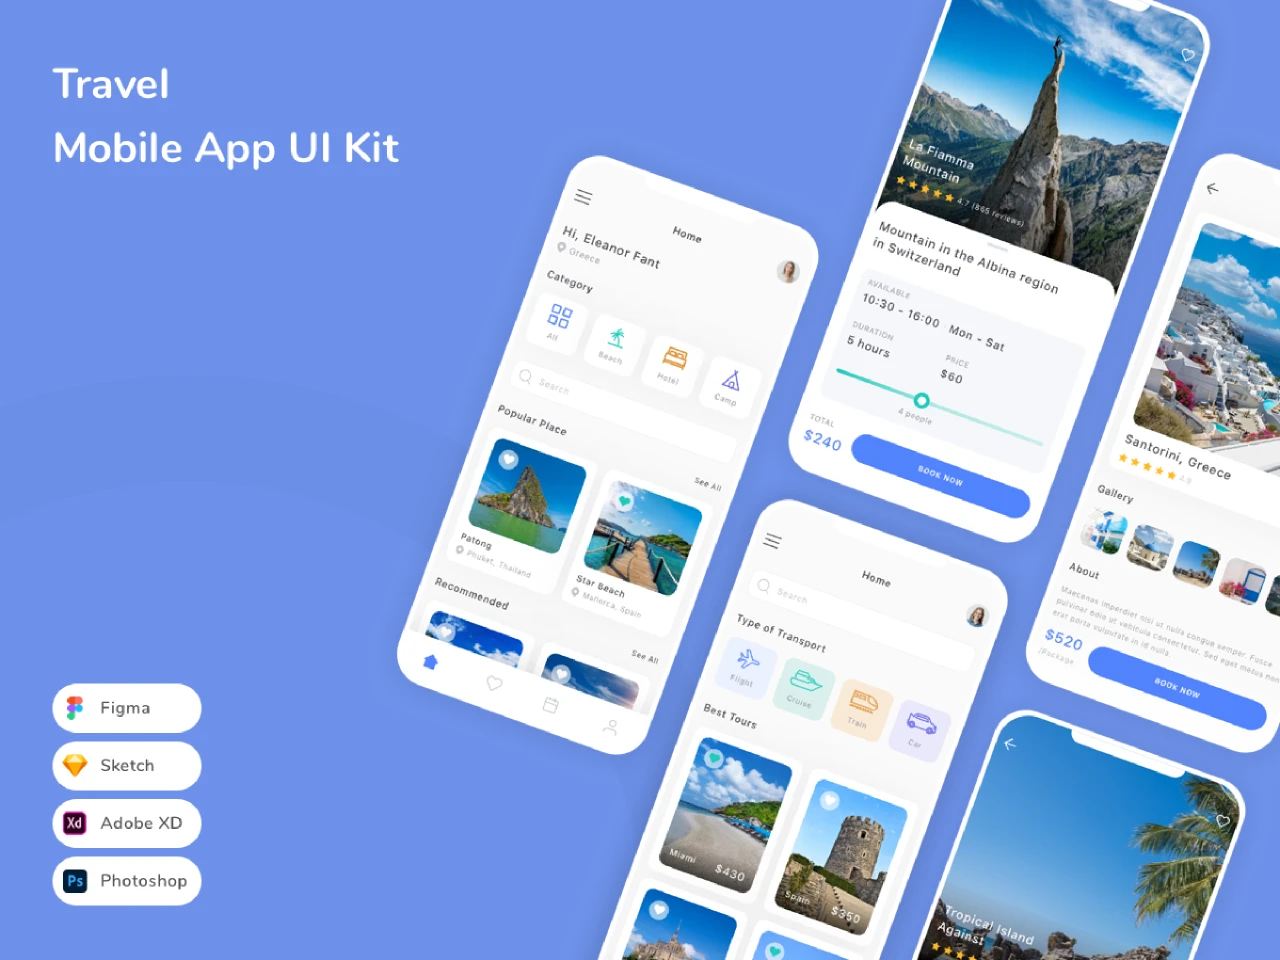 Travel Mobile App UI Kit for Figma and Adobe XD